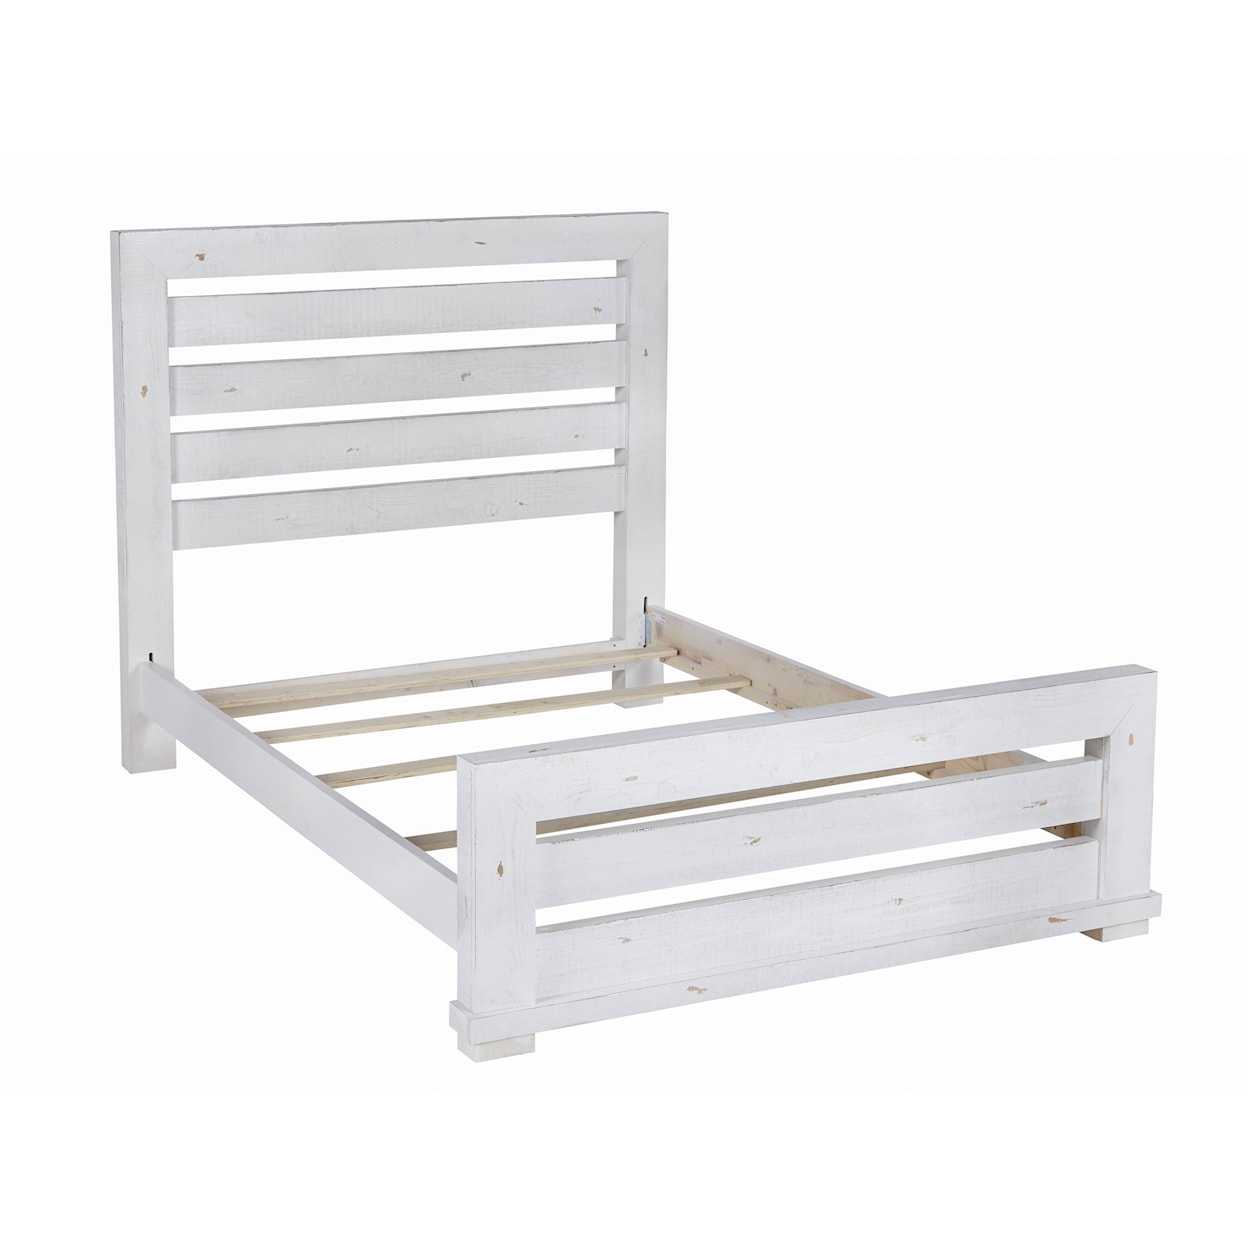 Carolina Chairs Willow Queen Slat Bed